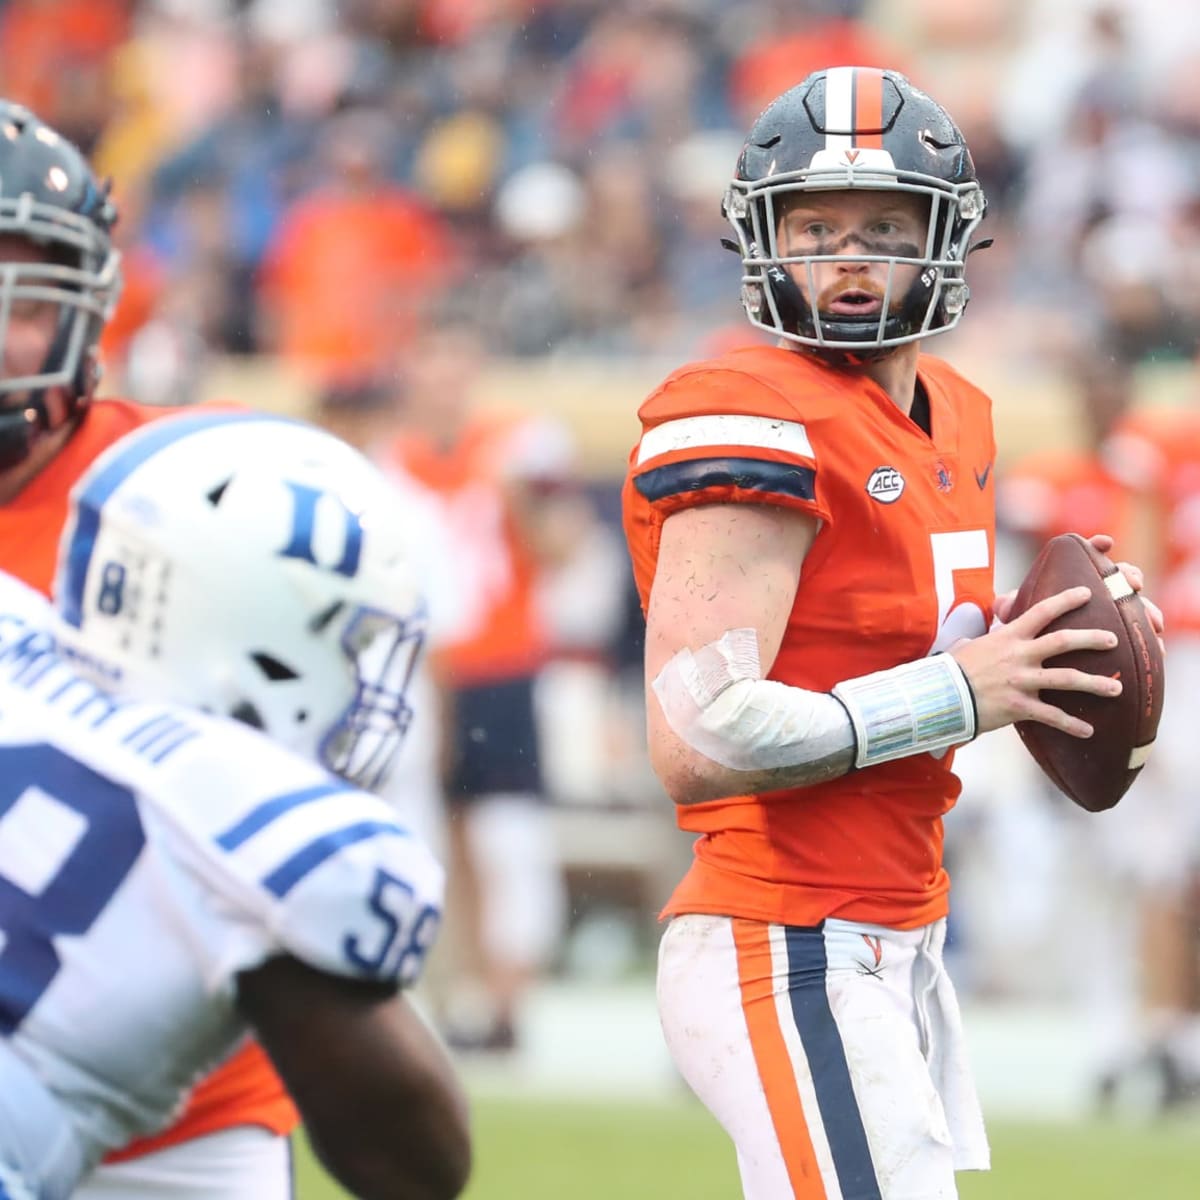 Virginia vs. North Carolina Game Preview, Score Prediction - Sports  Illustrated Virginia Cavaliers News, Analysis and More